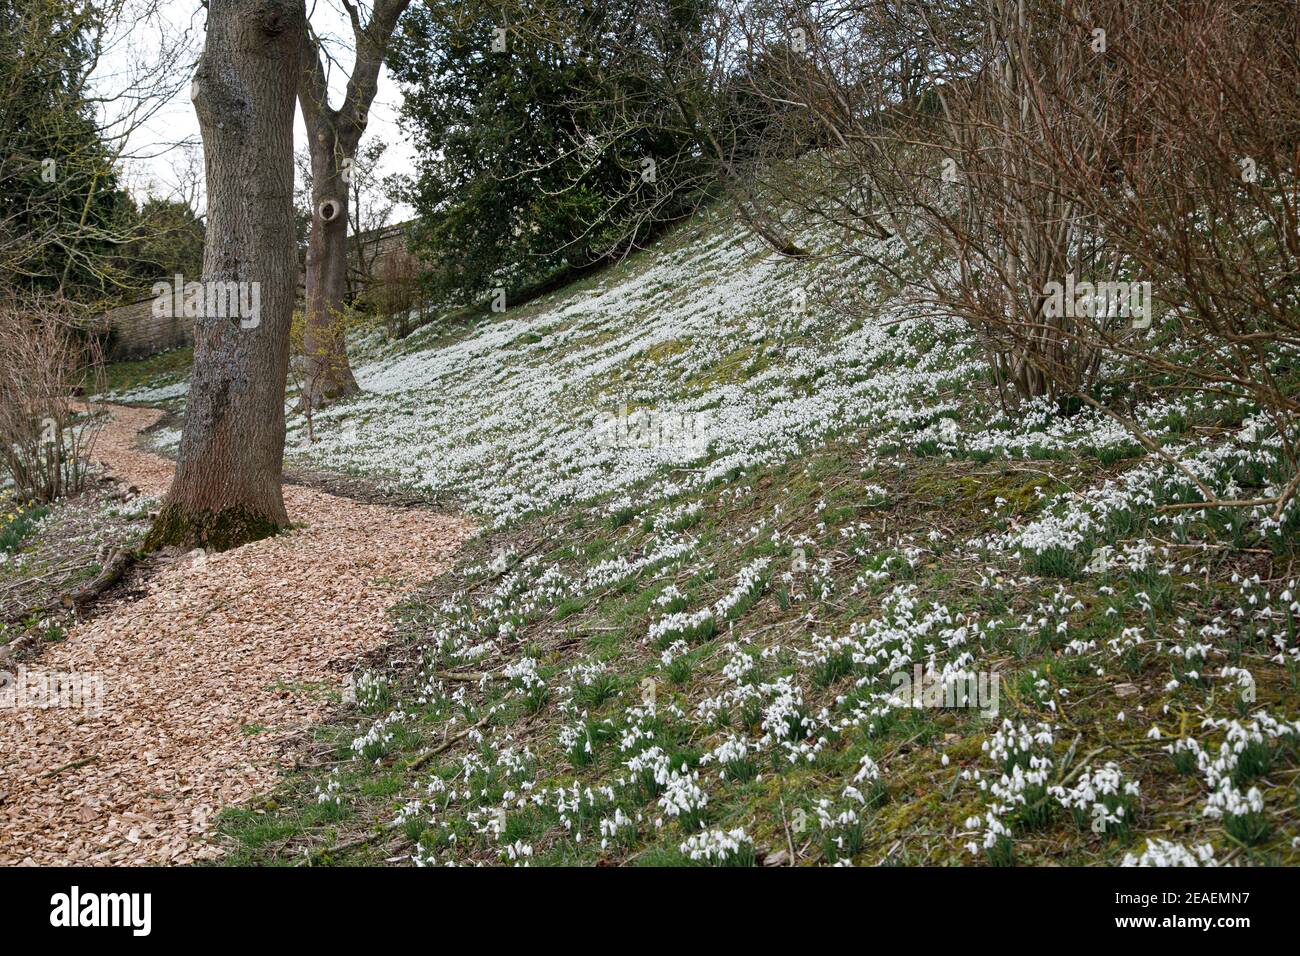 snowdrops at Easton Walled Garden, Lincolnshire, February Stock Photo